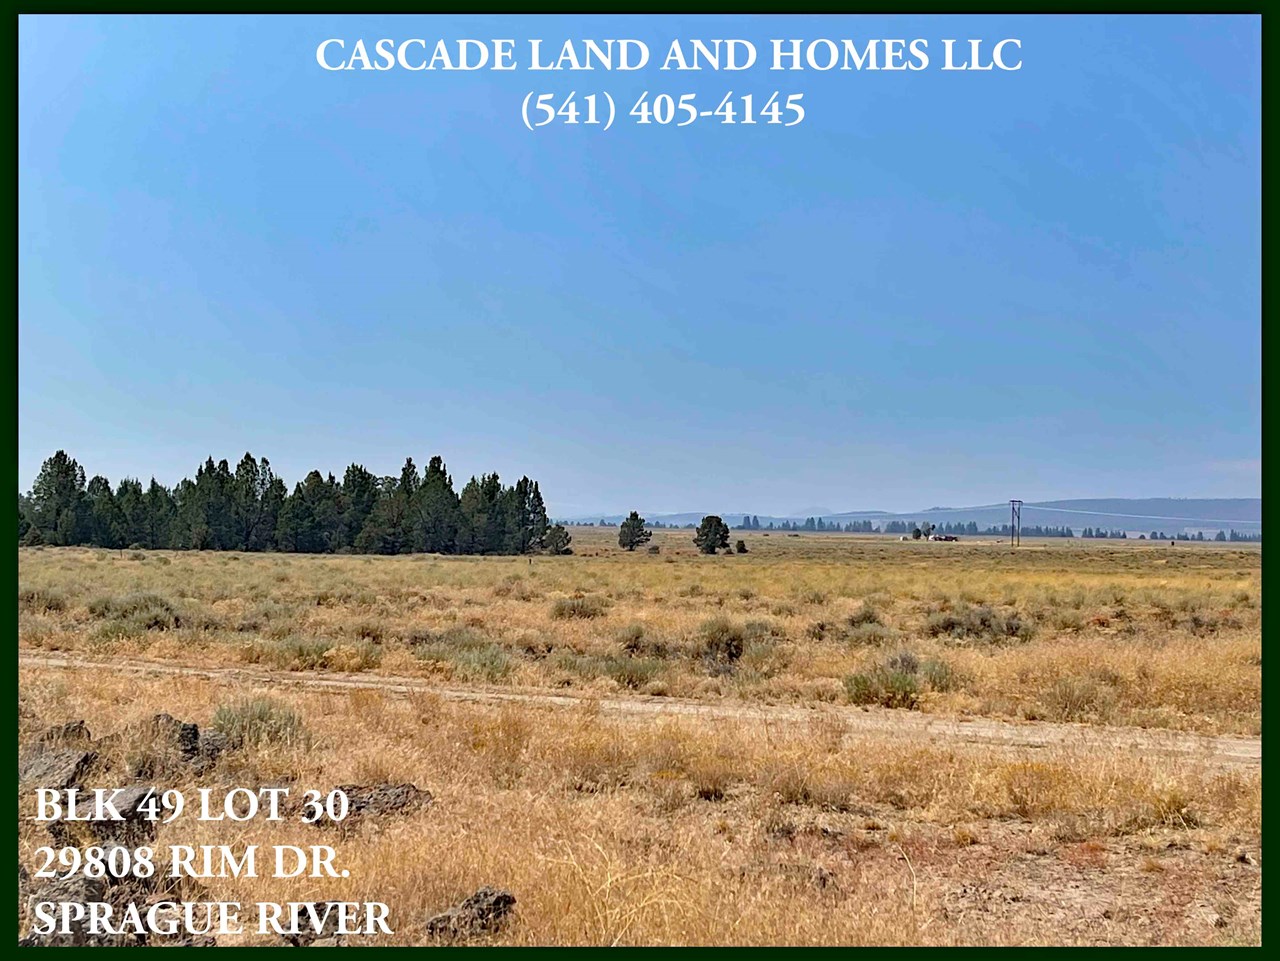 the property is part of the nimrod river park subdivision. most of the properties within the subdivision sit high on this volcanic plateau surrounded by ranchland and foothills. a few of the properties have homes, but the area is largely undeveloped. it's very peaceful out here.